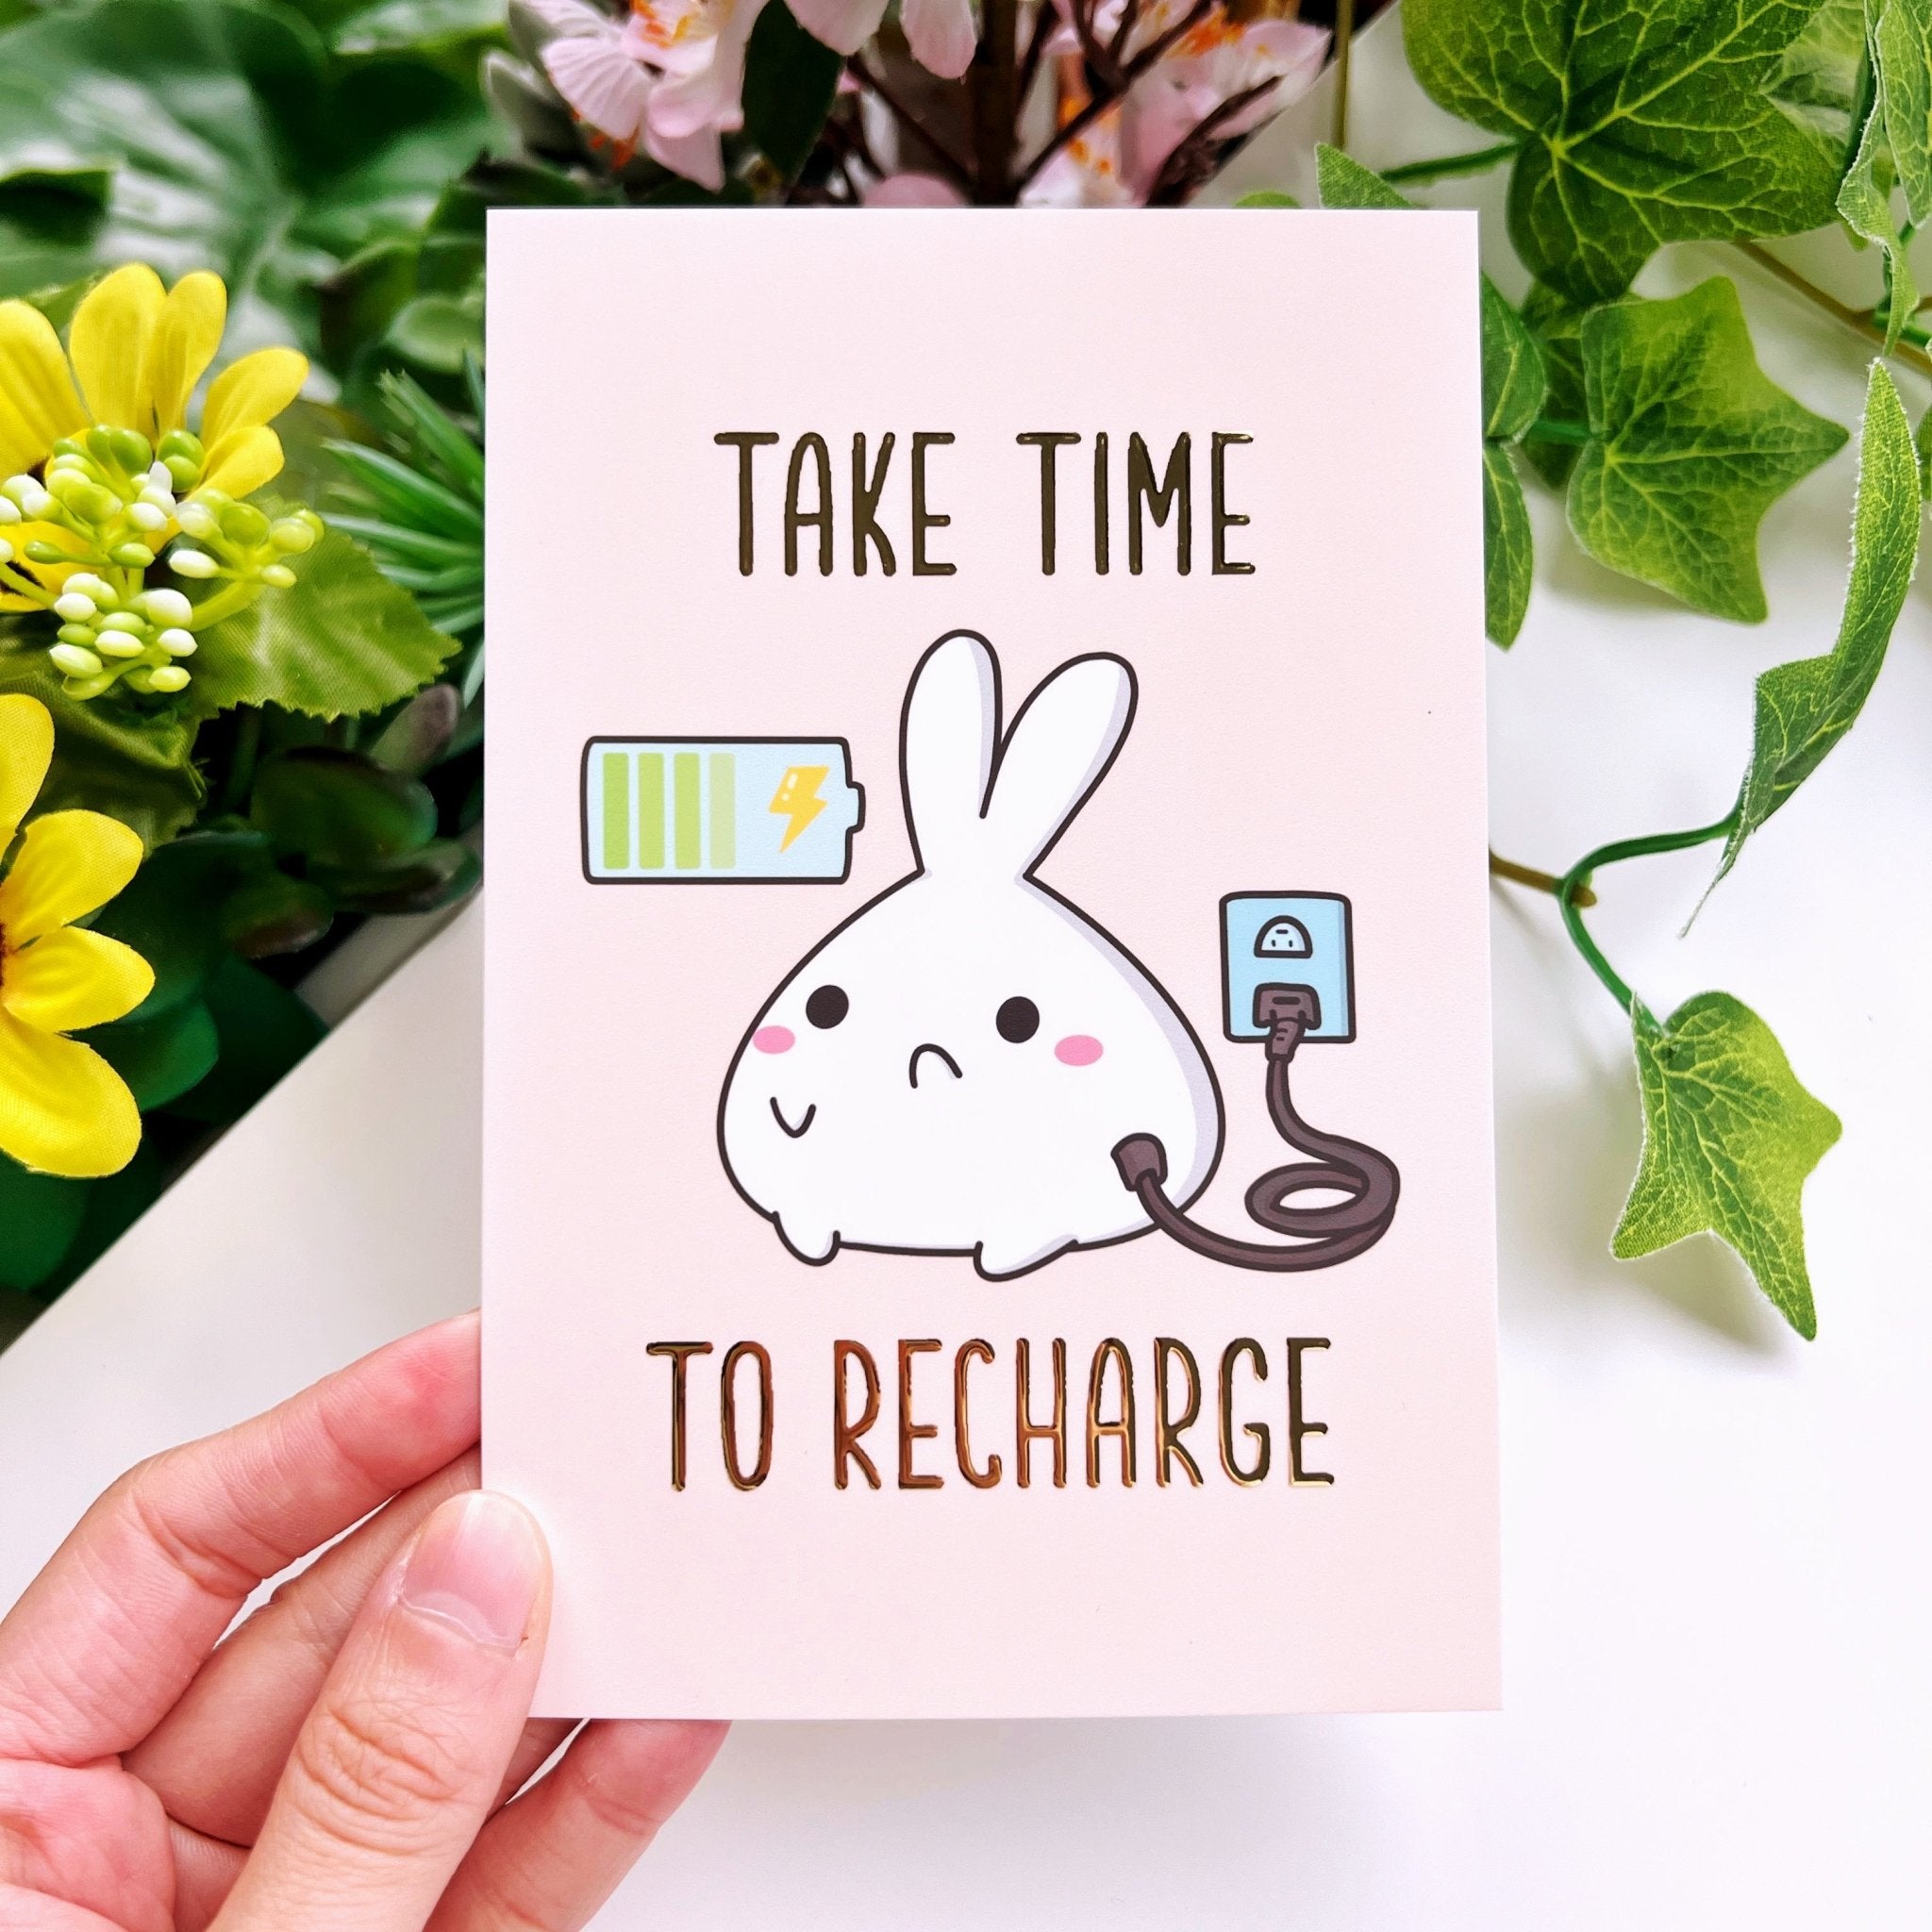 Journaling Card - Take Time To Recharge - Gold Foiled - SumLilThings